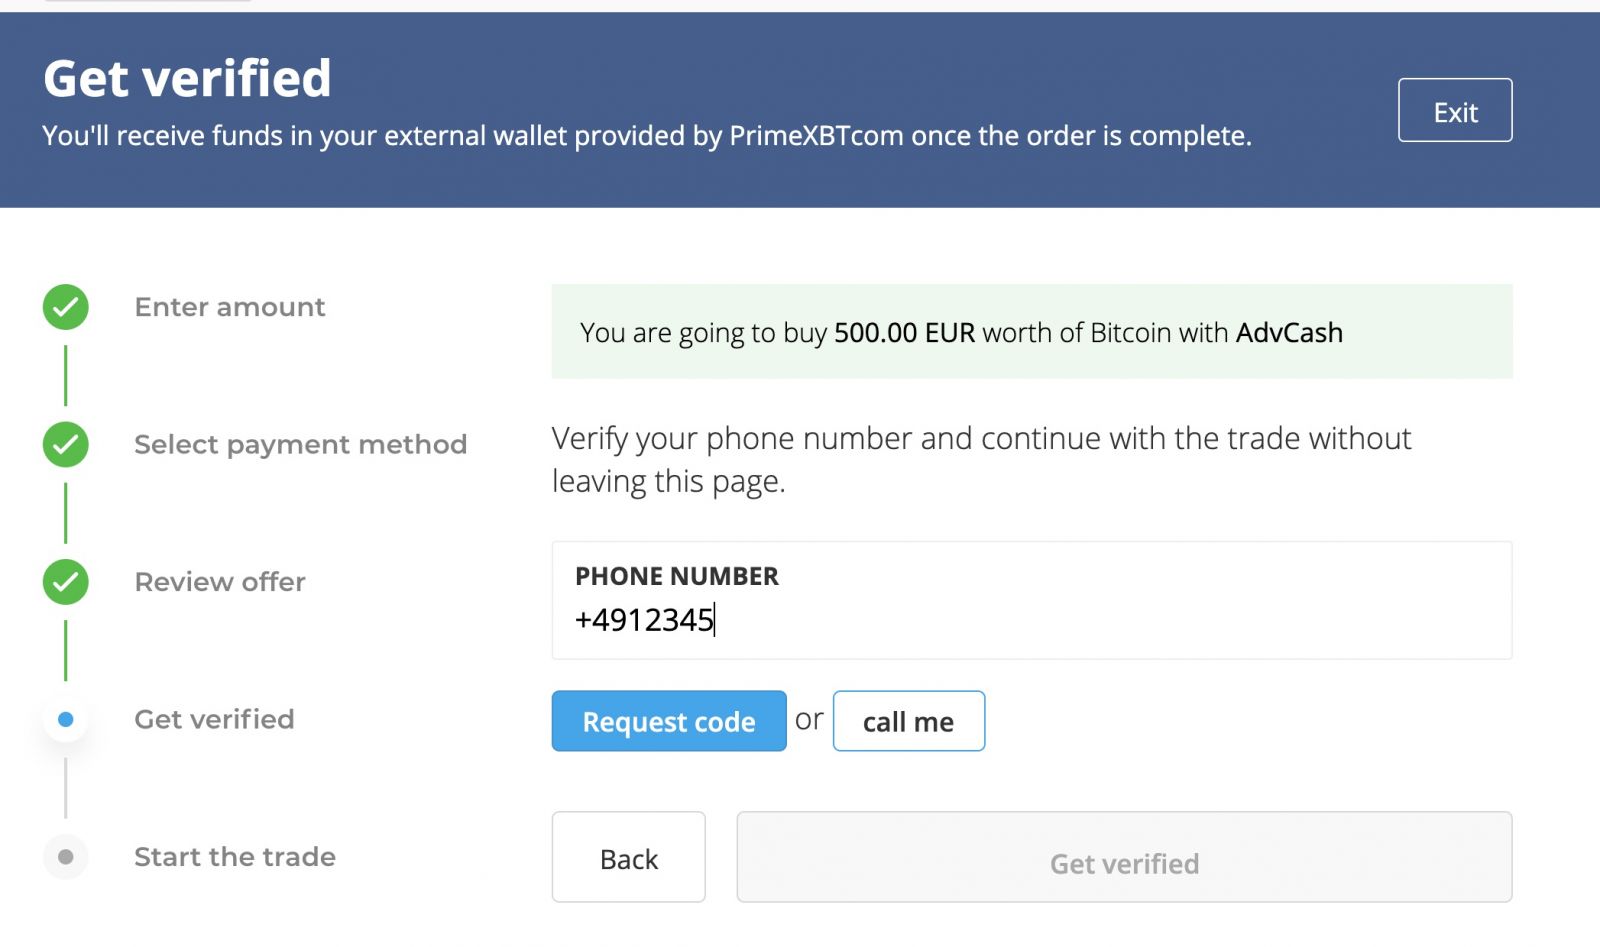 Review the details of your offer in PrimeXBT